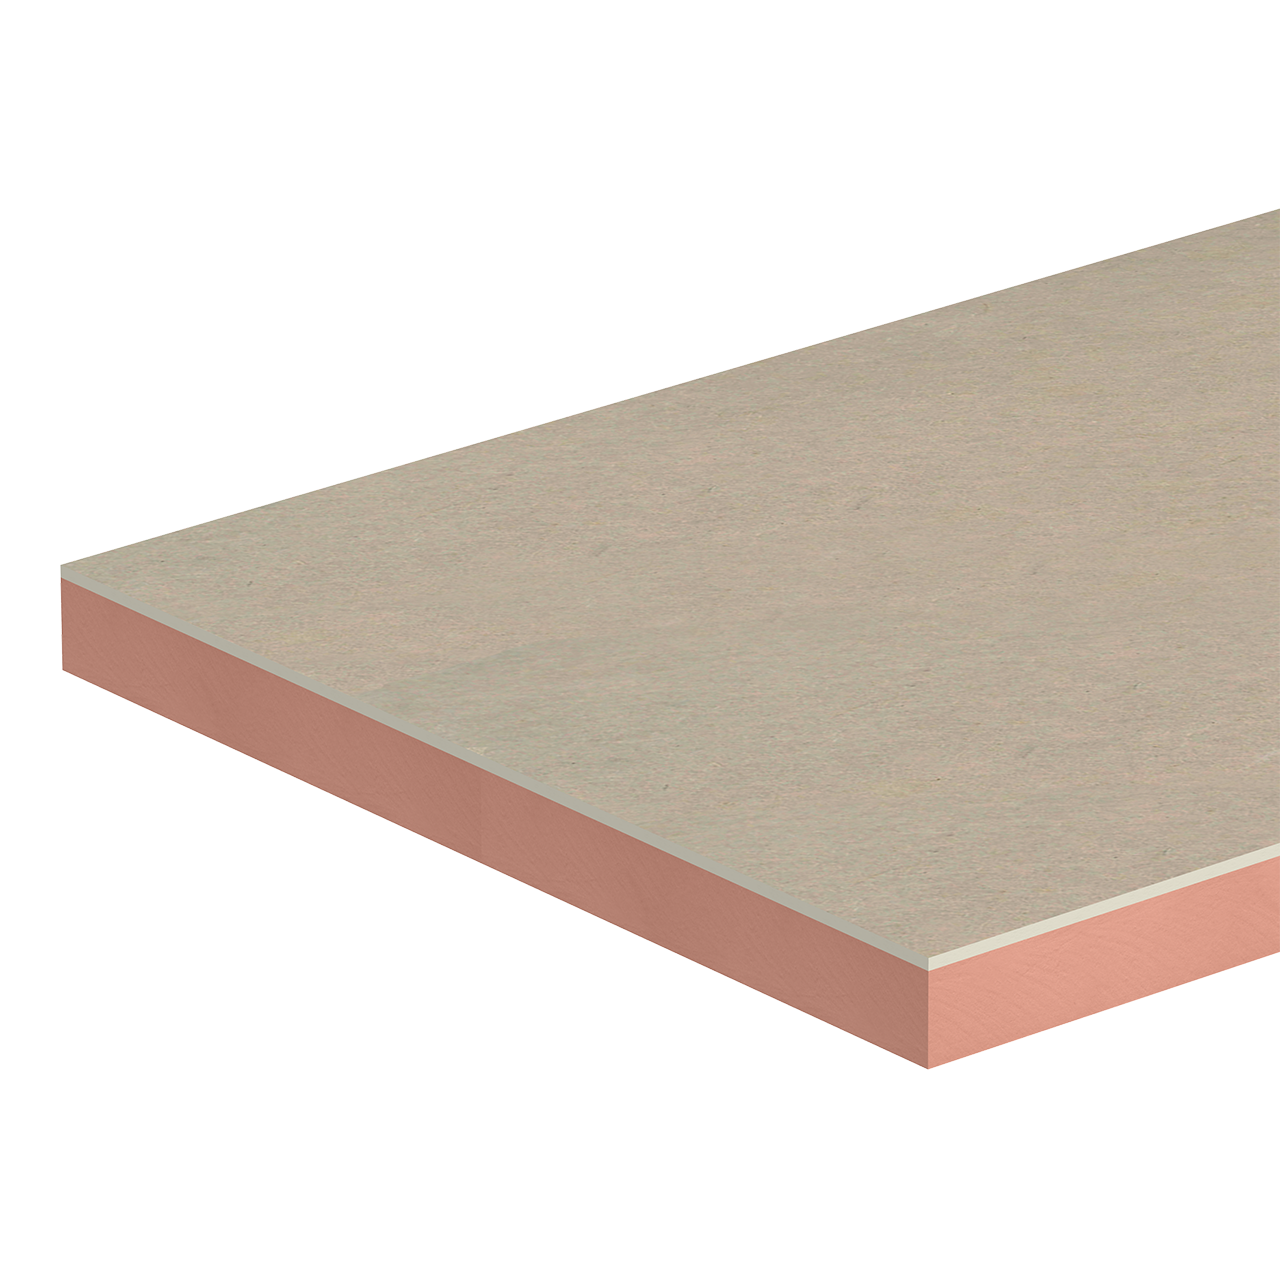 Kingspan Kooltherm K118 Insulated Plasterboard 2400mm x 1200mm (Pack of 21) 25mm thickness